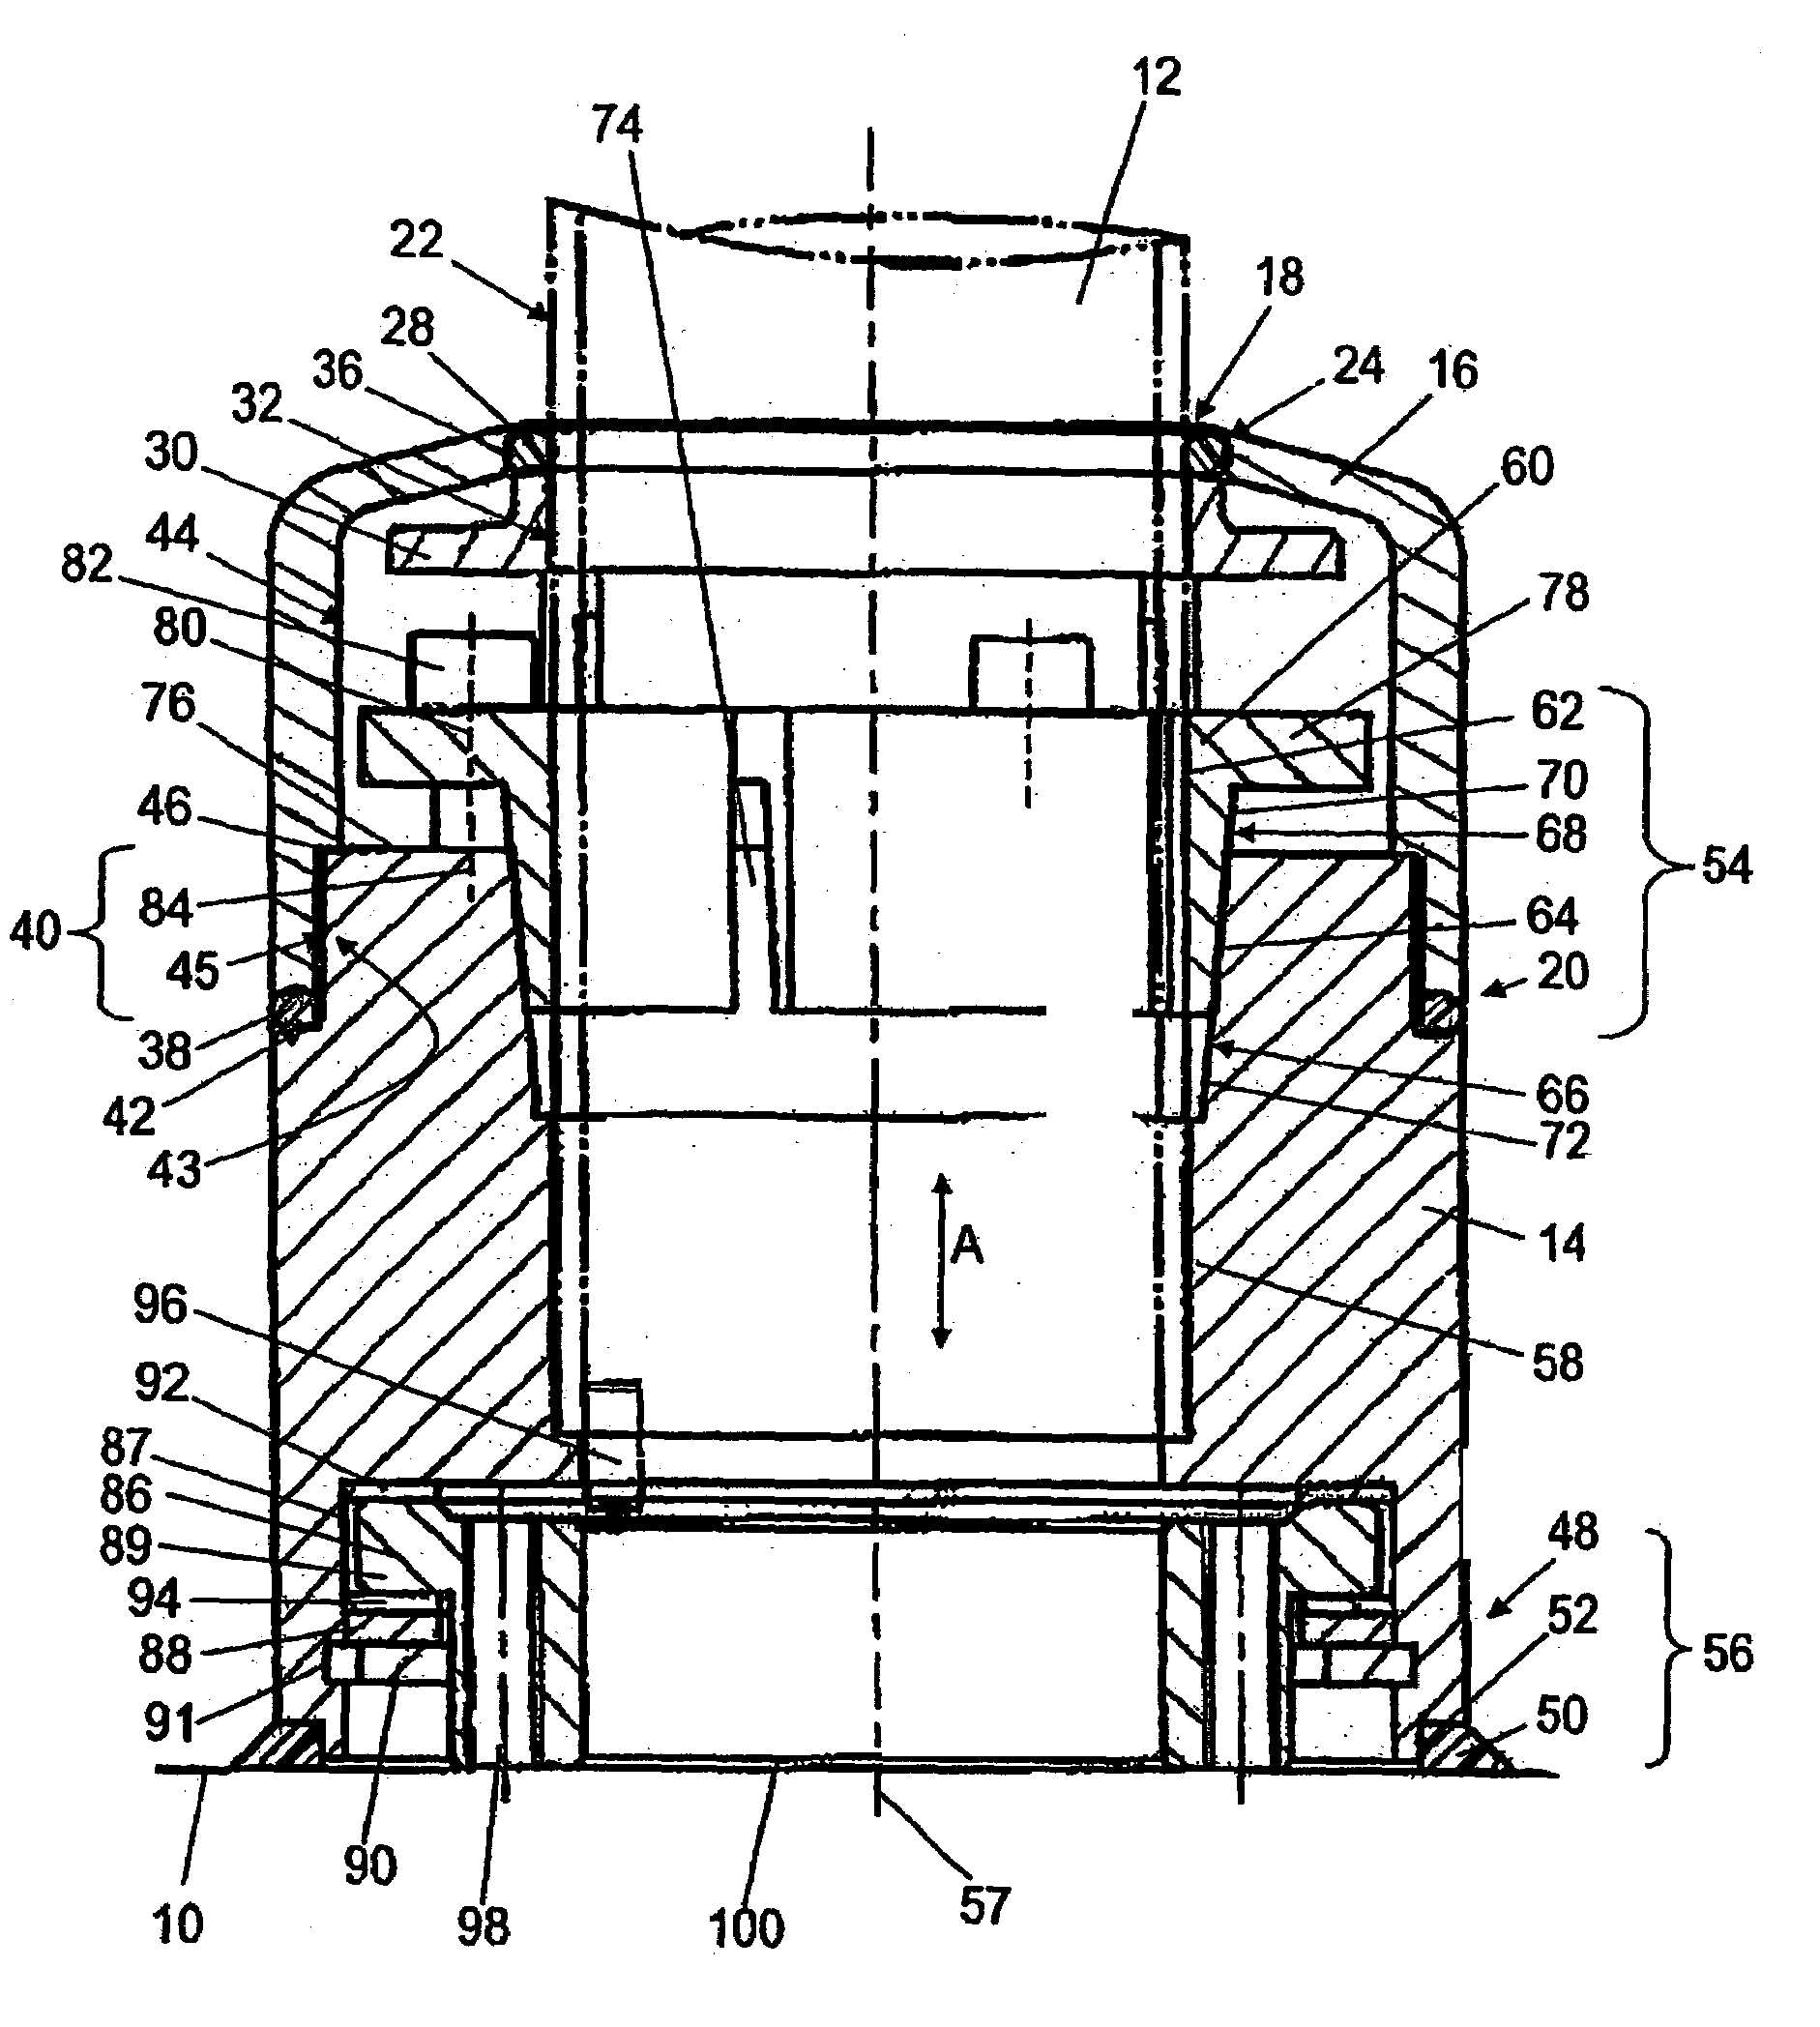 Coupling element of a support arm system